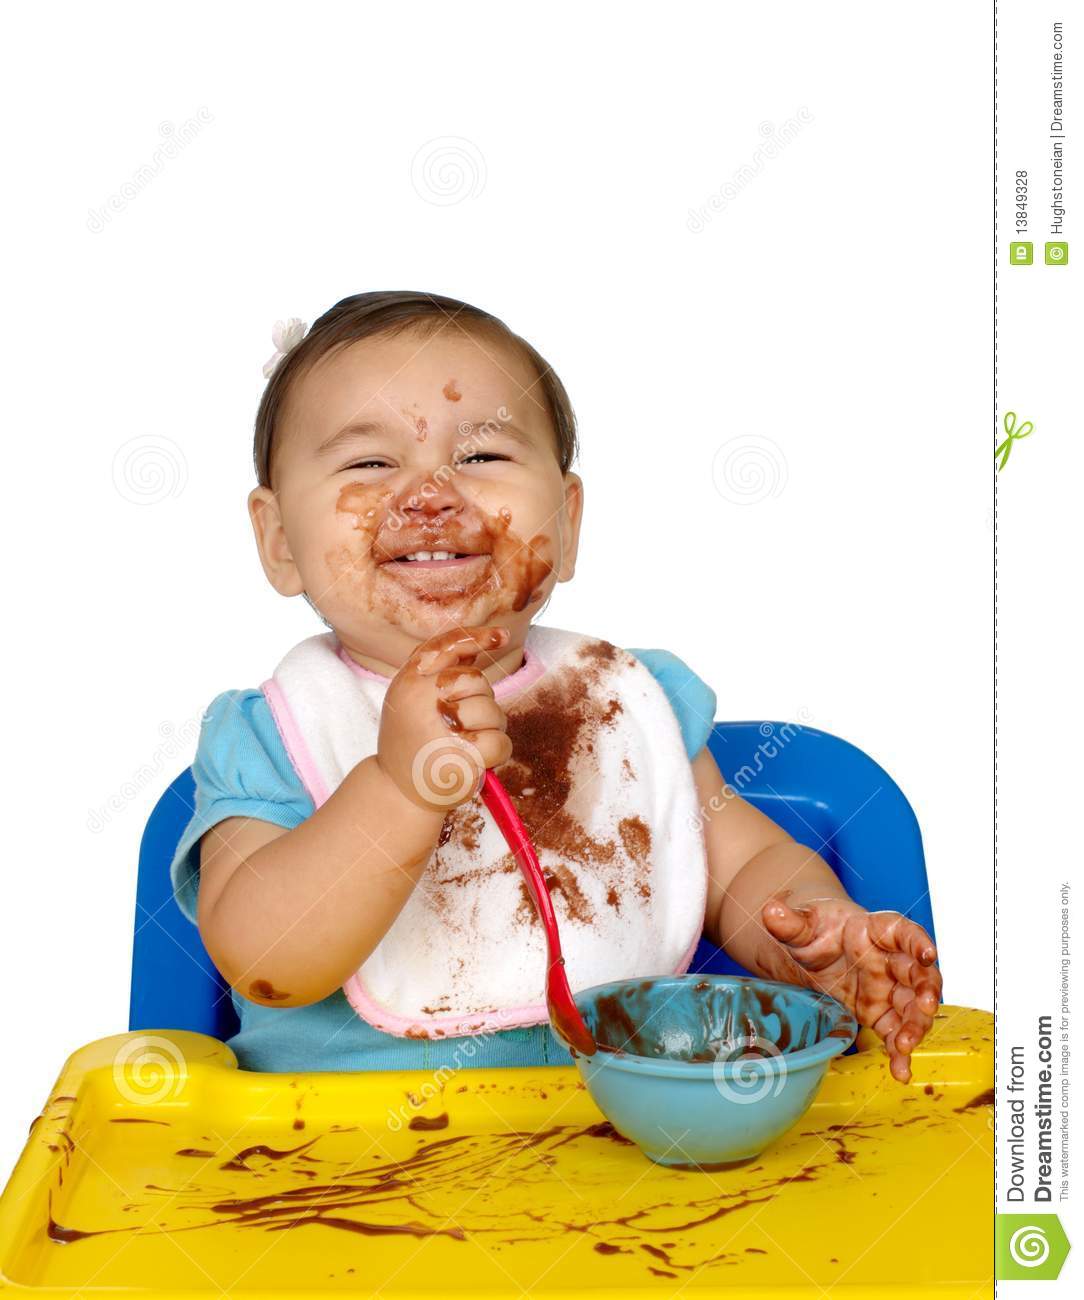 One Year Old Baby Girl Eating Chocolate Pudding With A Very Messy Face    